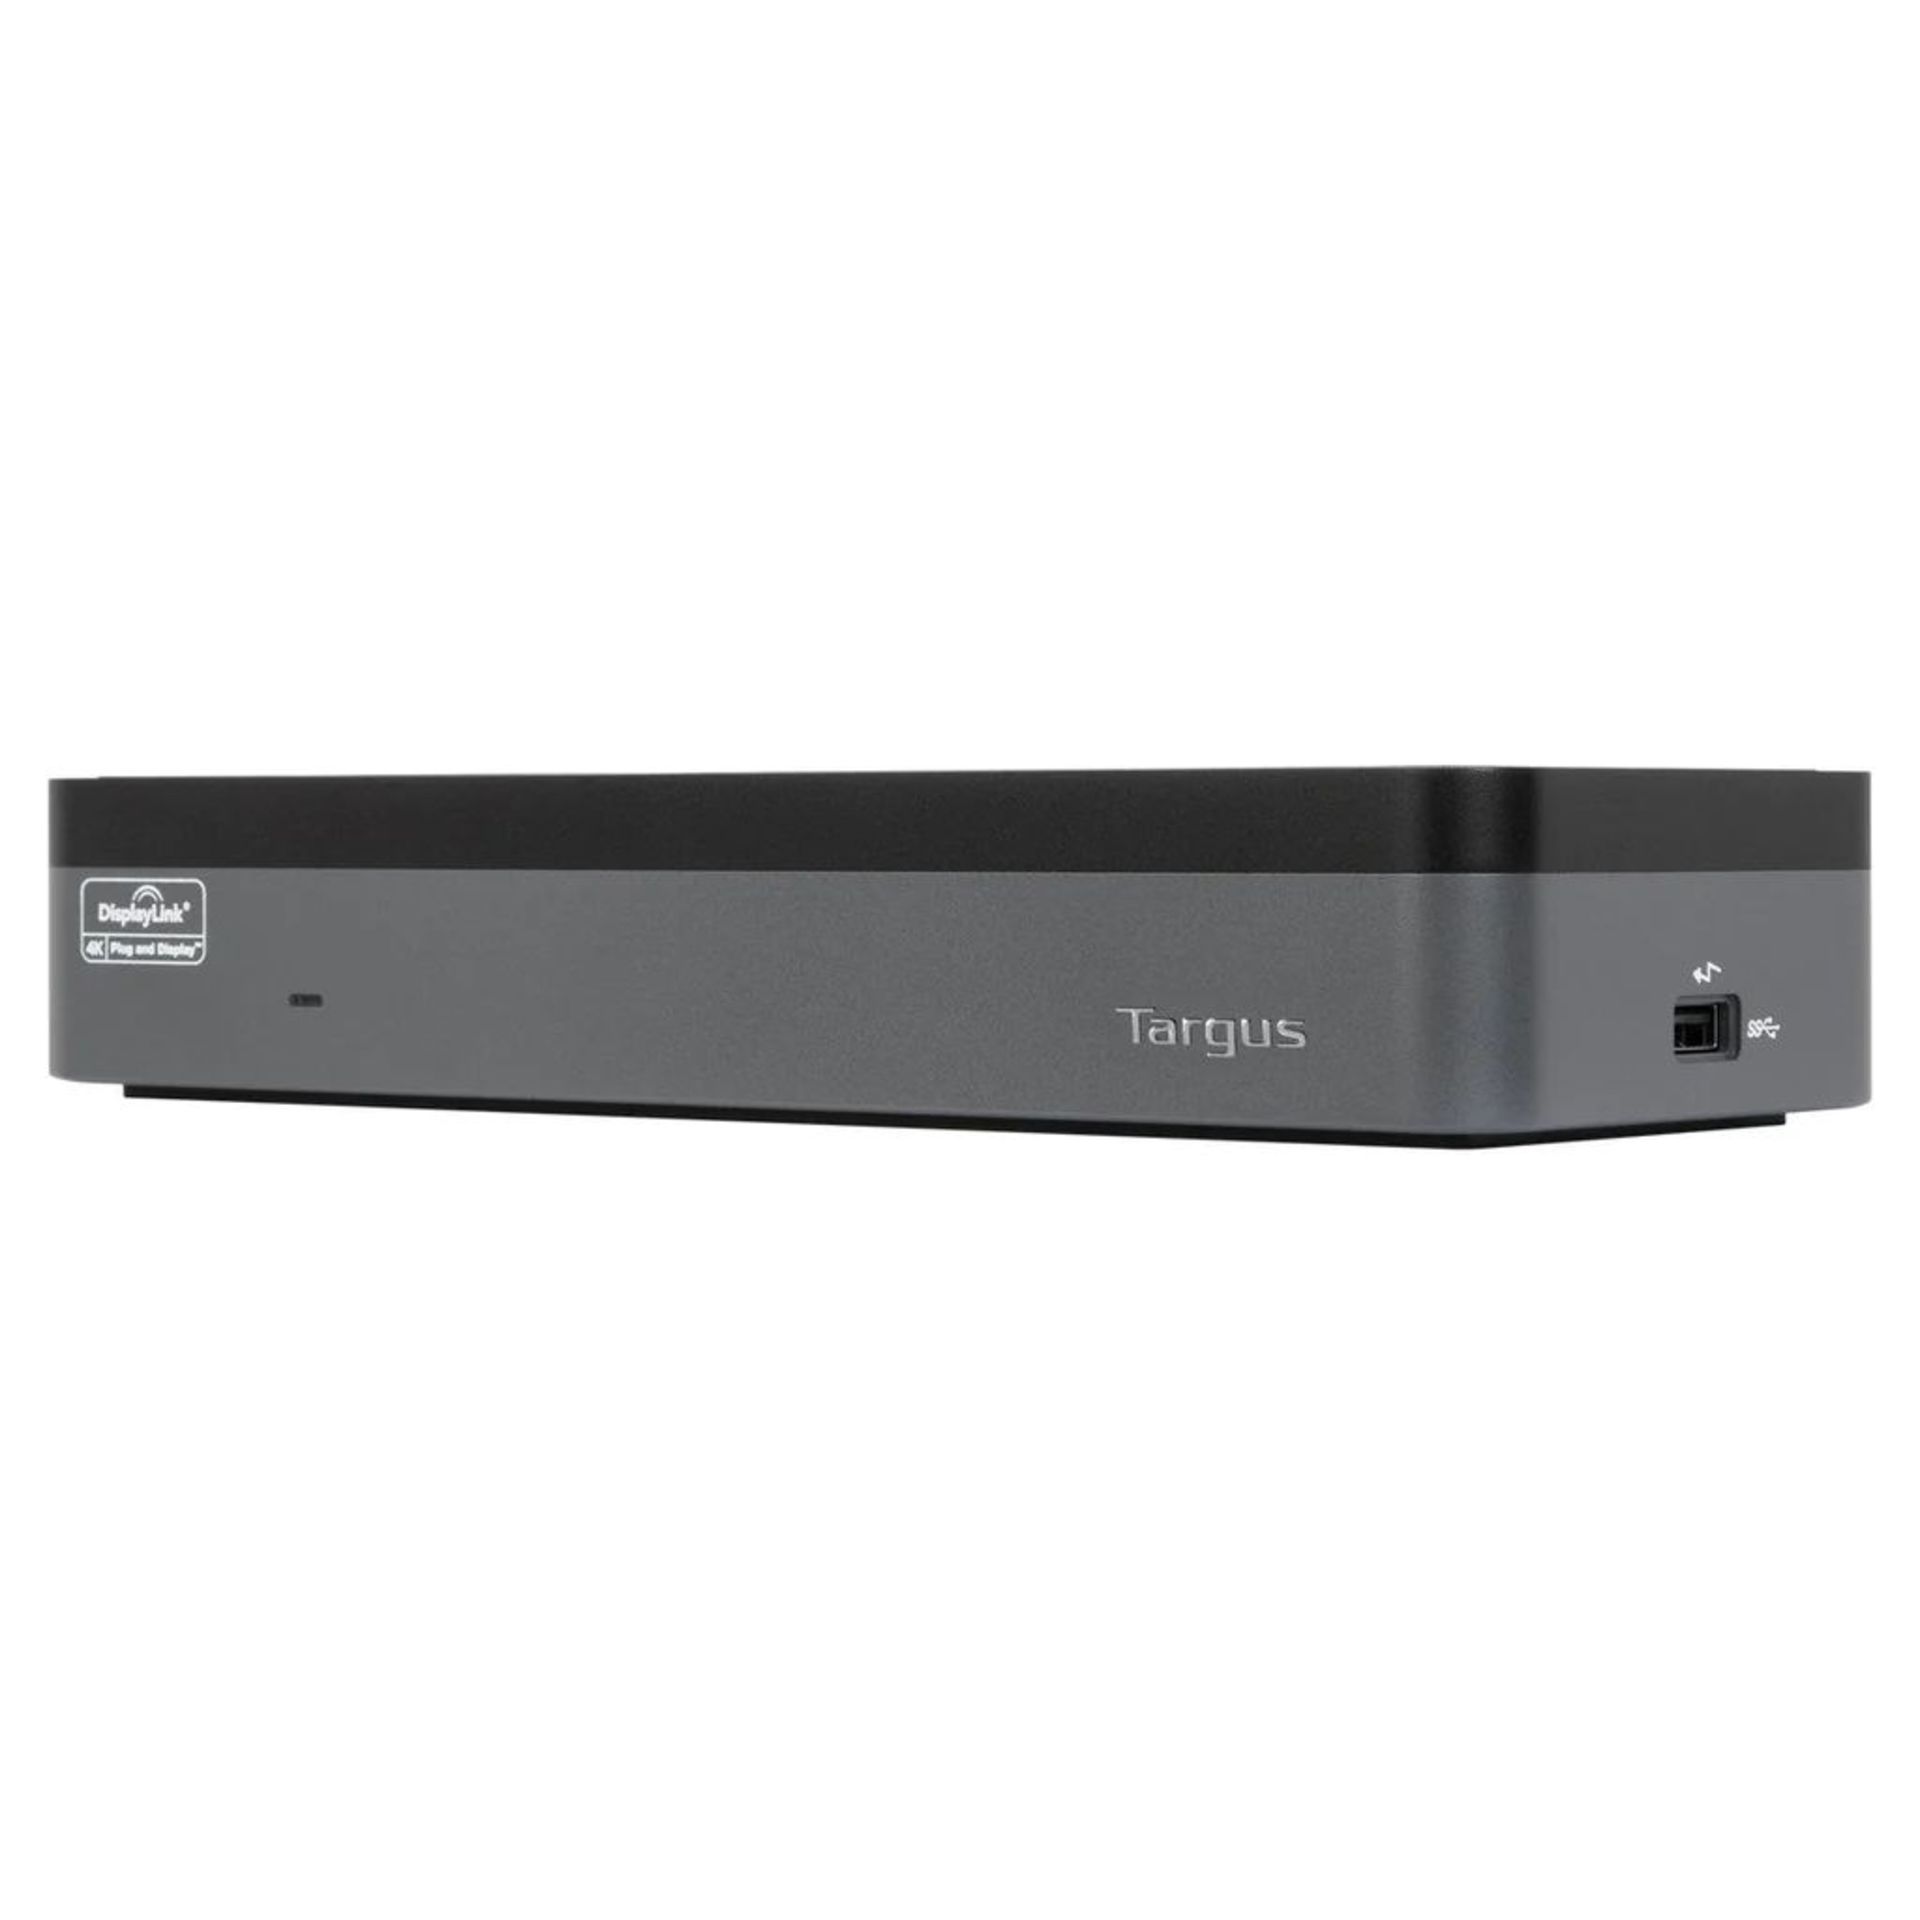 NEW & BOXED TARGUS Four Head 4K Dock With 100w Docking Station (DOCK570EUZ-82). RRP £351.89. Boost - Image 3 of 8